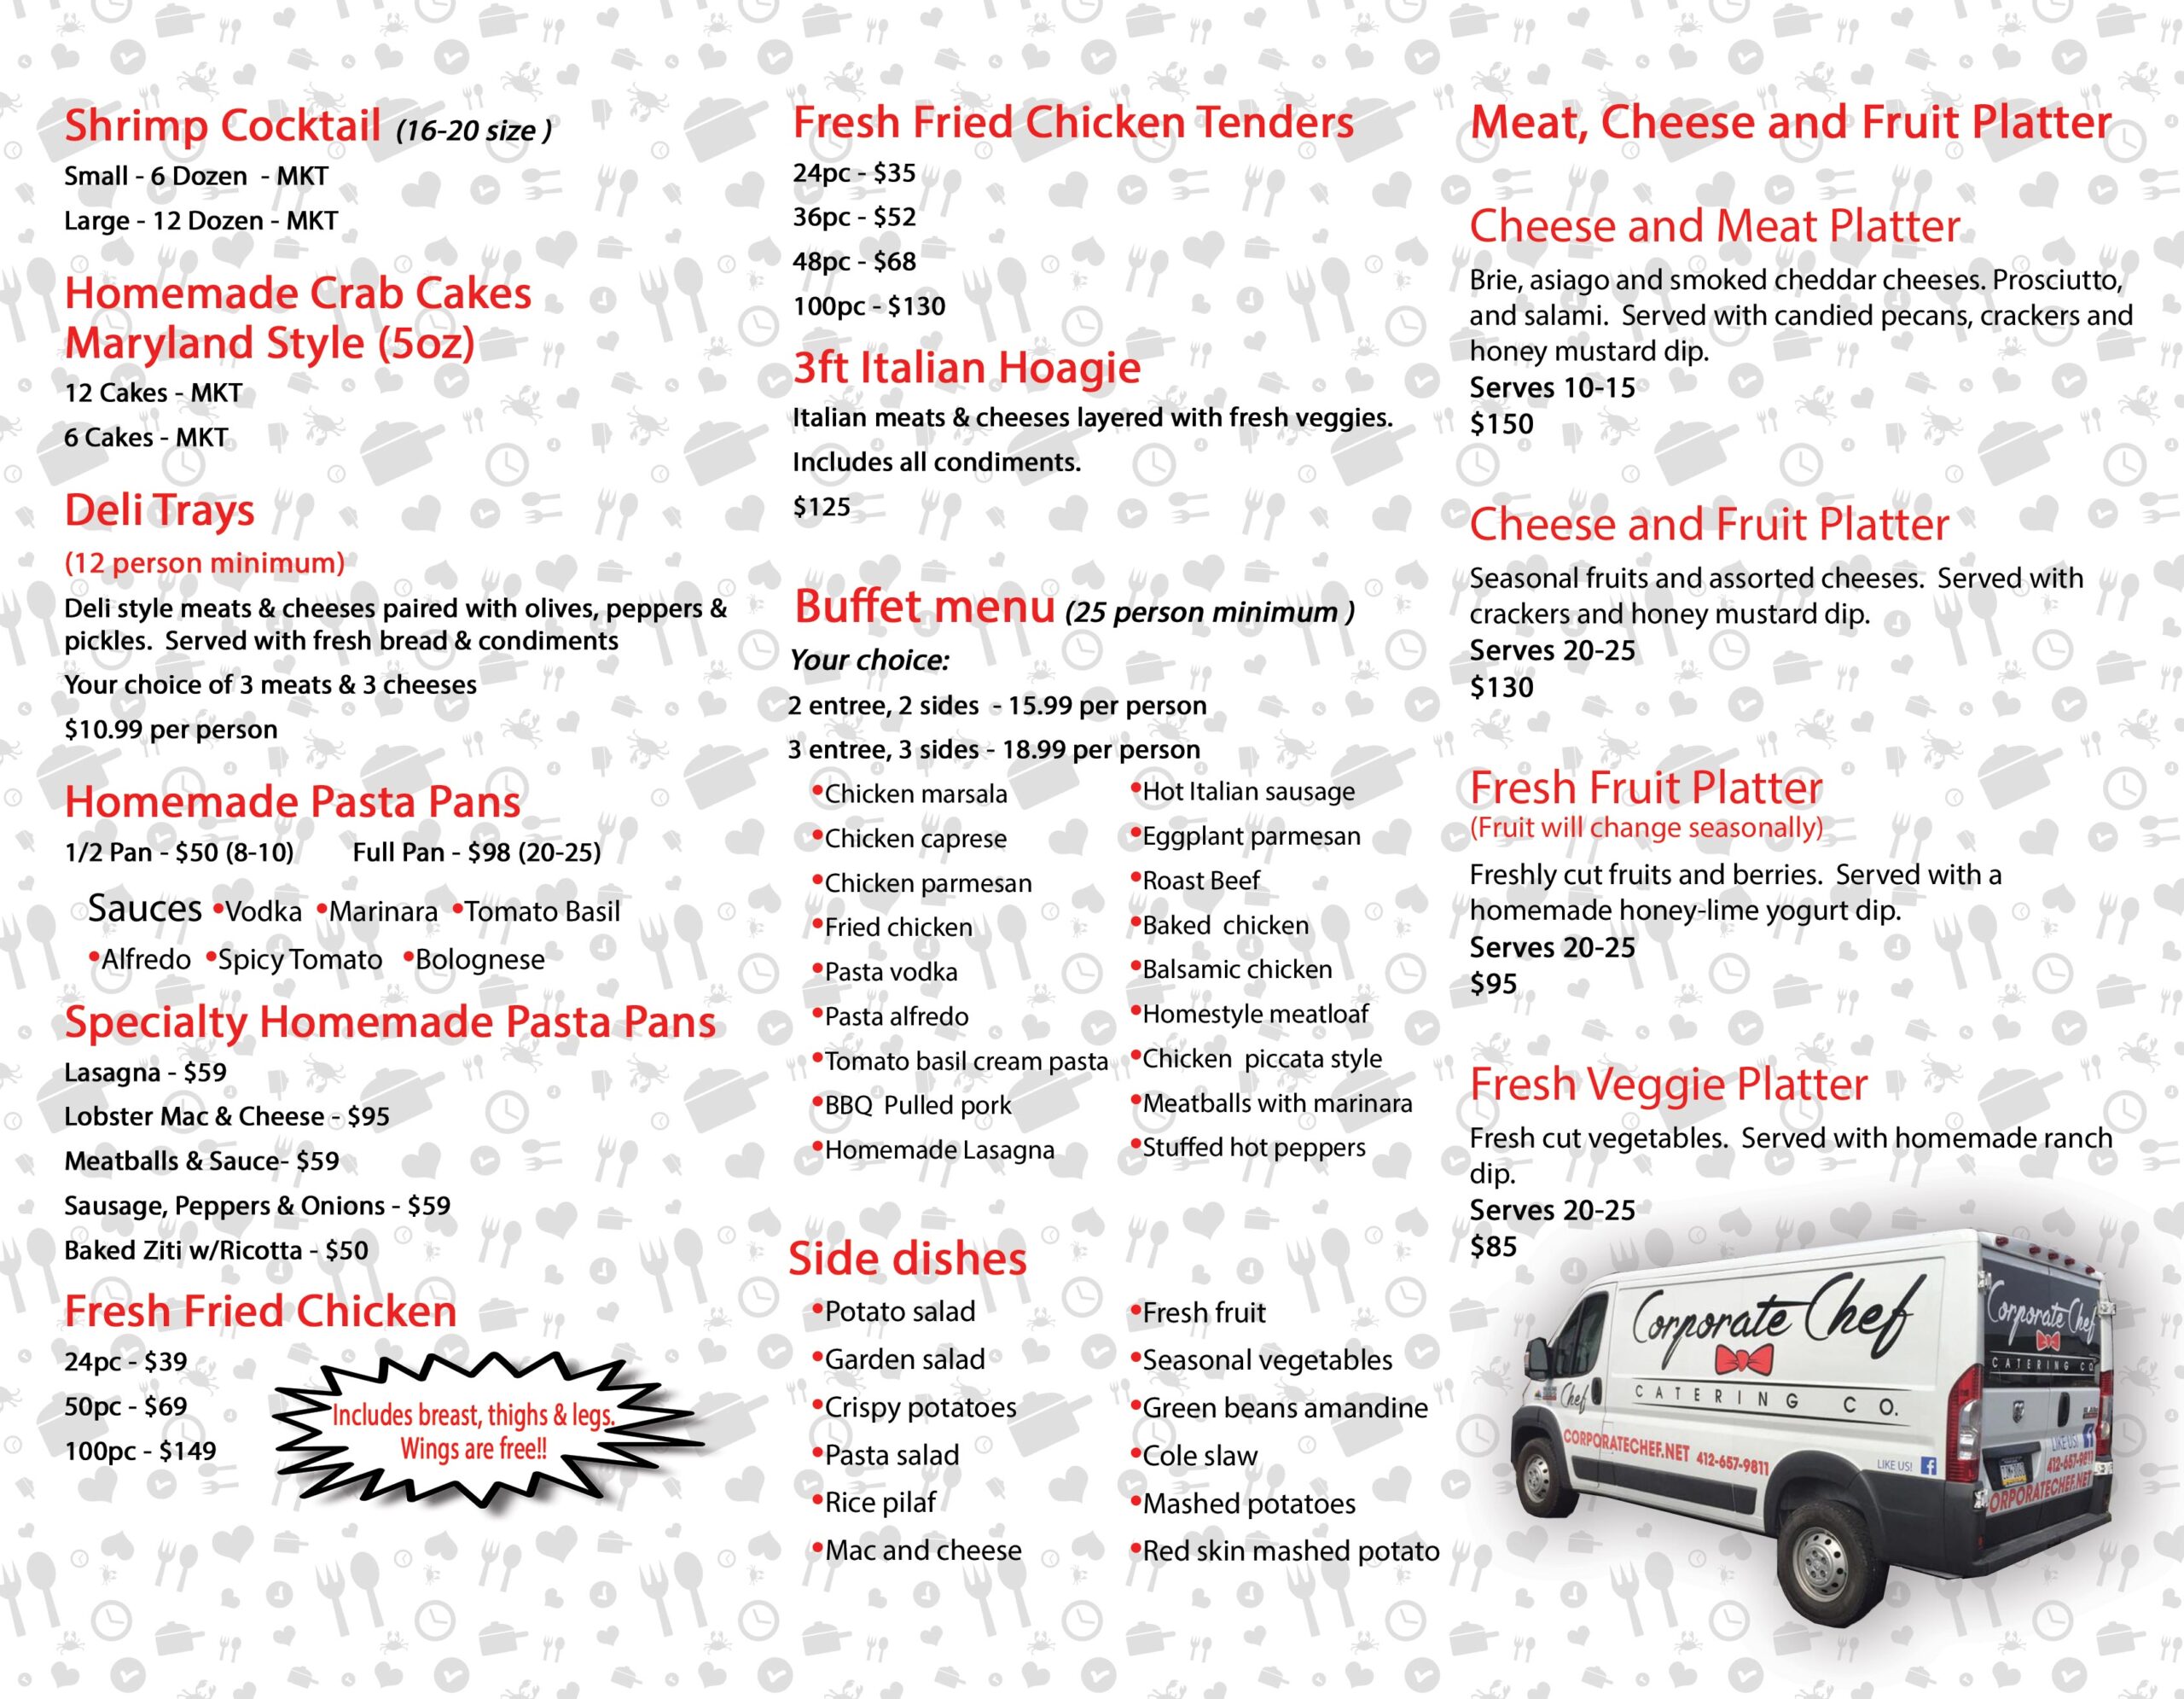 Catering menu options for functions, sporting events and parties catered by the Corporate Chef Catering Co located in Bridgeville, PA.